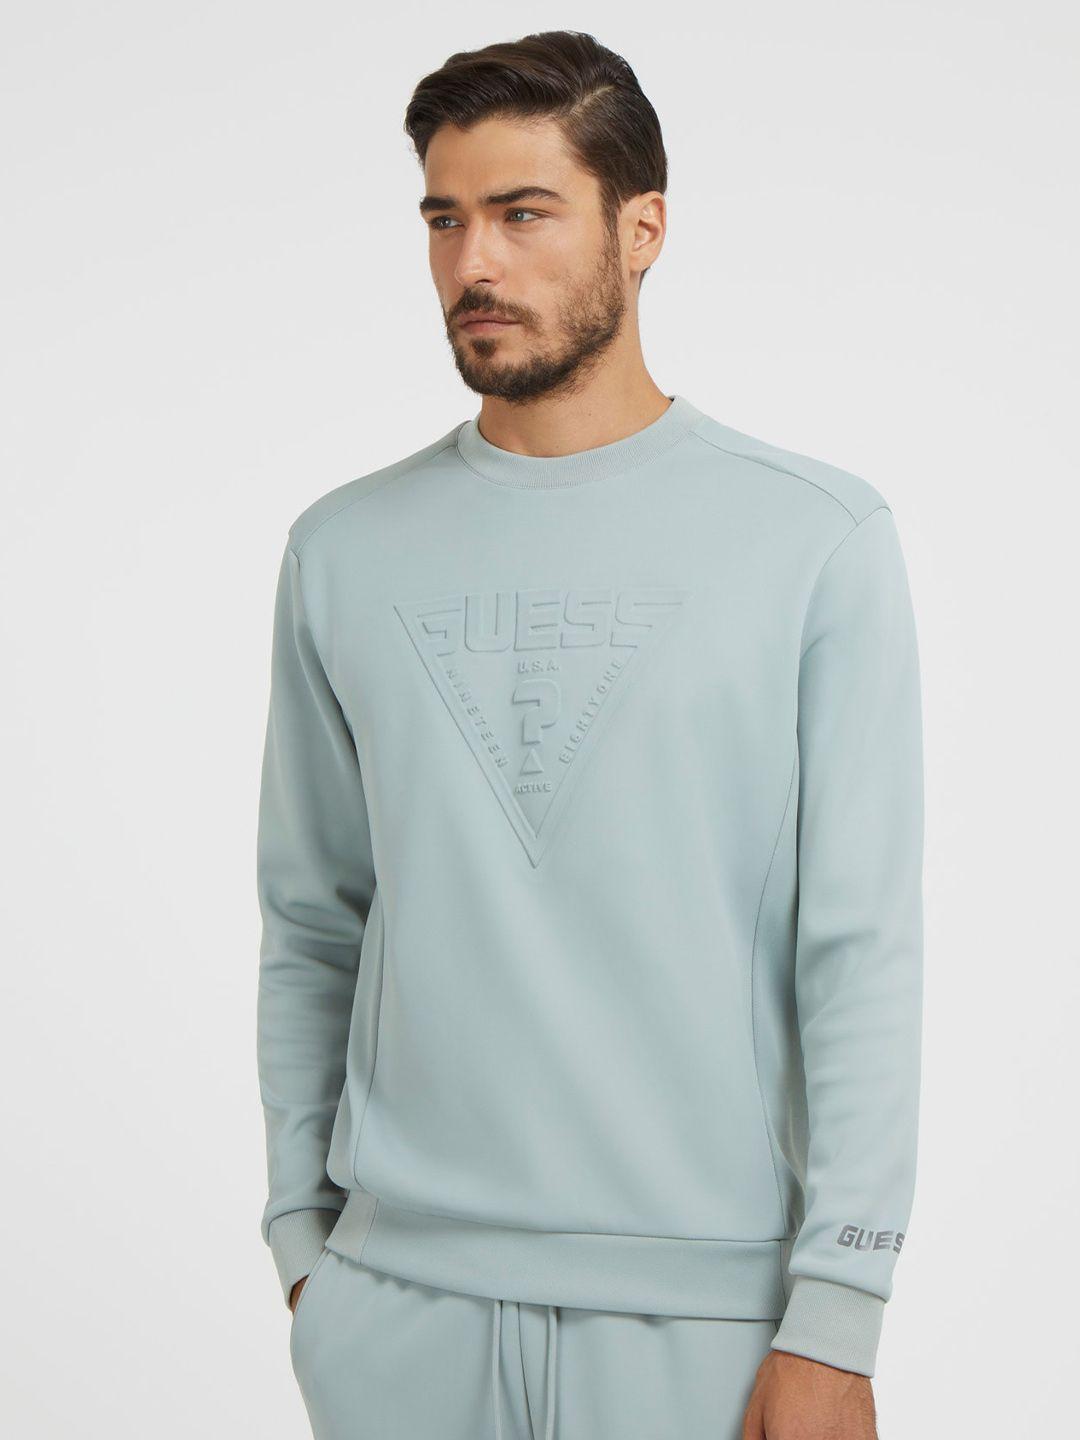 guess typography printed round neck pullover sweatshirt